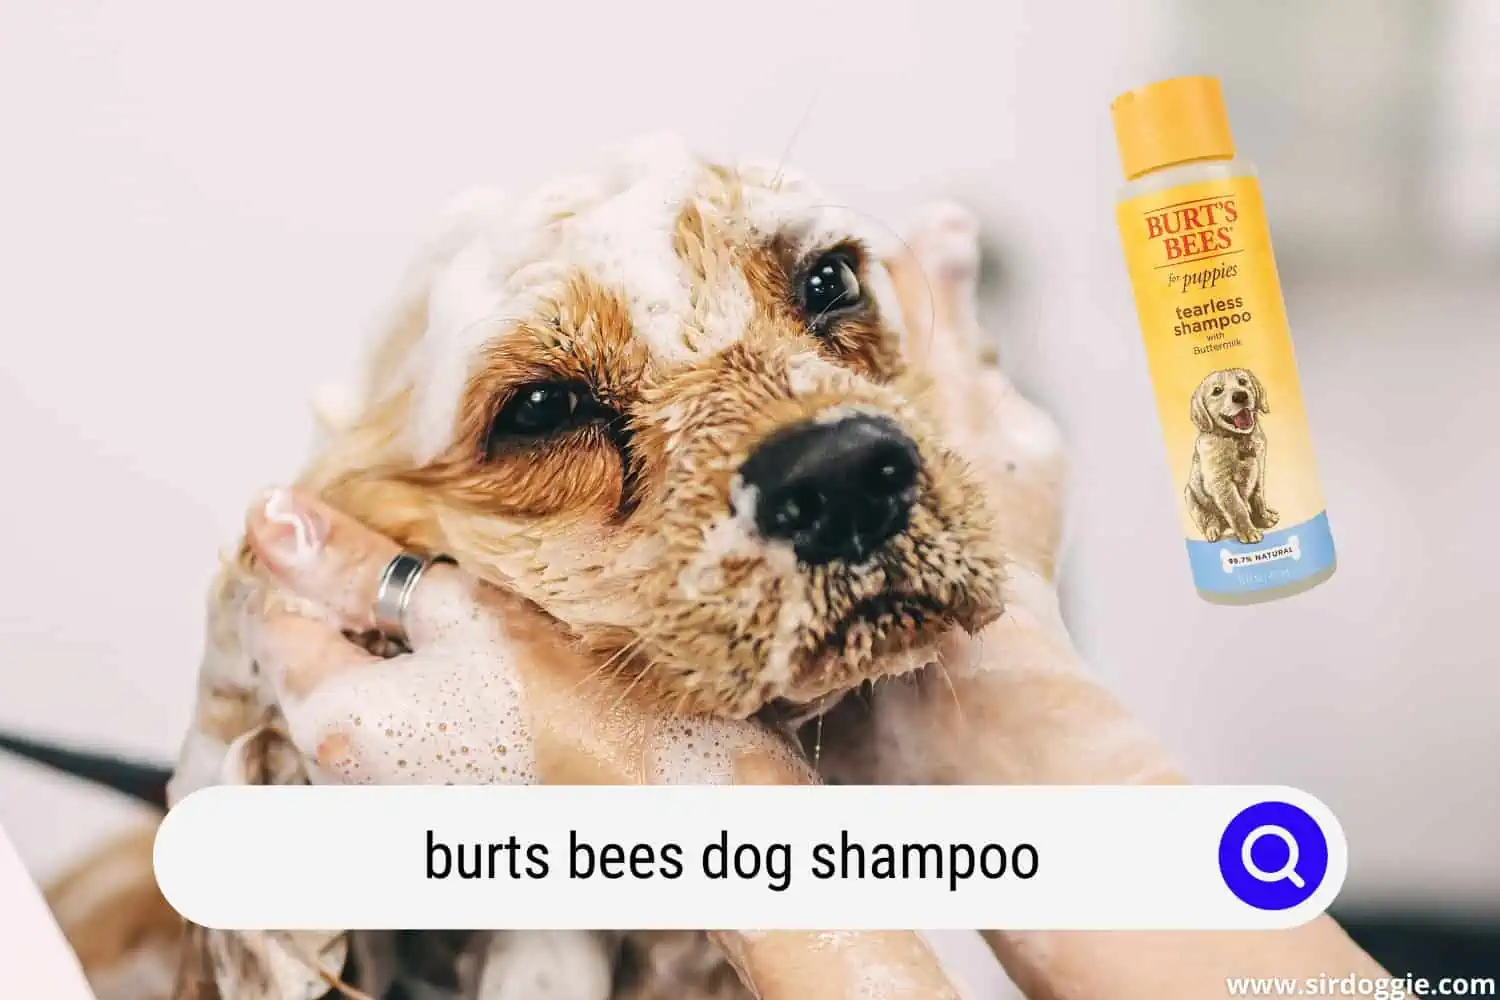 A pet owner using burts bees shampoo in his dog